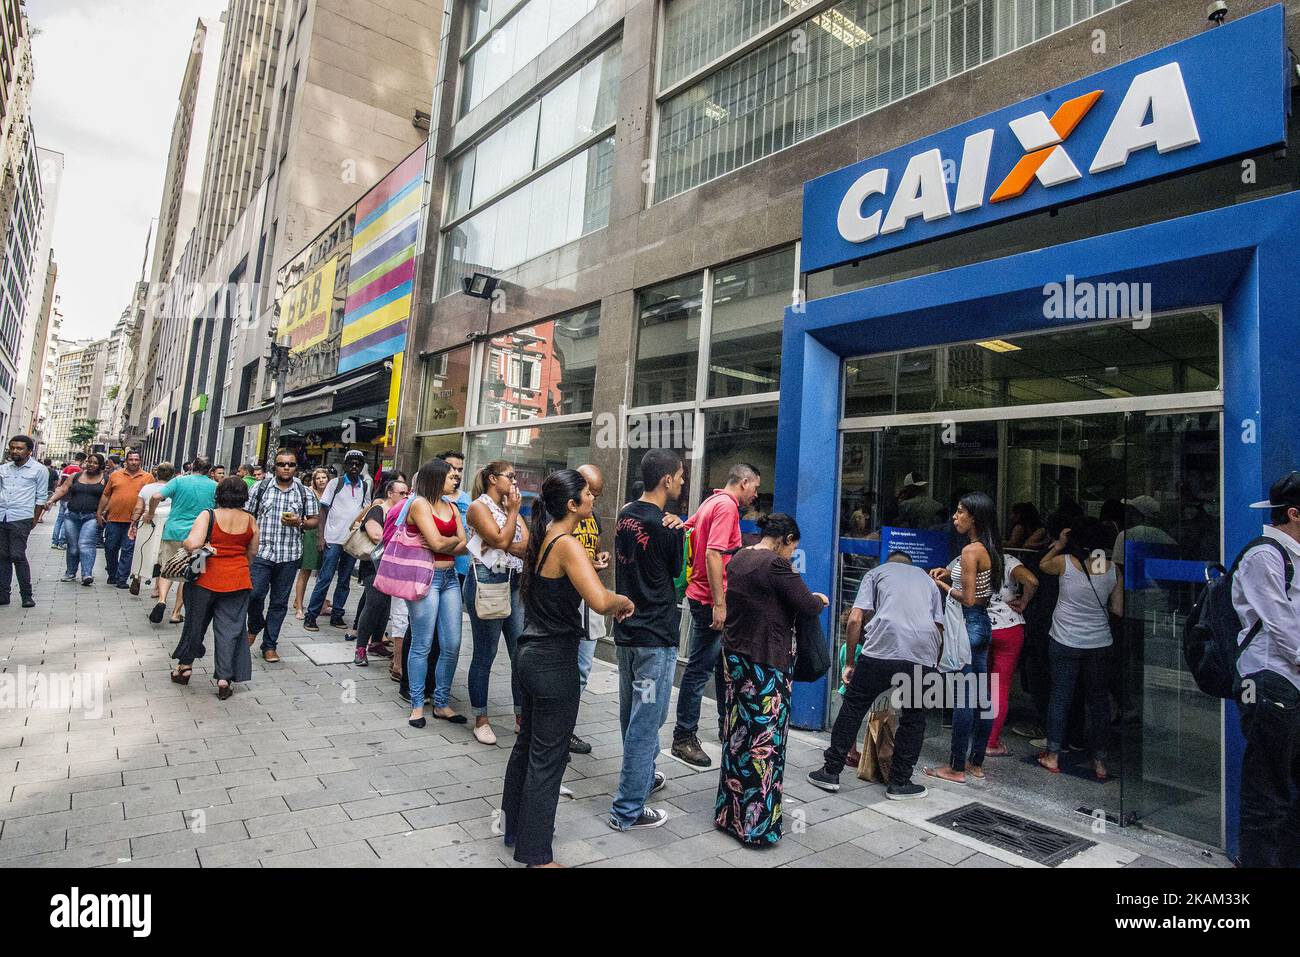 Customers stand in line to speak to an employee about withdrawing money from the Workers Severance Fund (FGTS) outside a Caixa Economica Federal bank branch in Sao Paulo, Brazil, on Friday, March 10, 2017. The Government releases from this Friday the withdrawals of inactive accounts of the Fund for the Guarantee of Time of Service (FGTS) - promised by President Michel Temer in (MP 763/16) is expected to benefit 30.2 million workers and to inject about 30 billion reais into the economy, according to the authorities. The branches of the Federal Savings Bank opened in advance, at 8 am (Brasília t Stock Photo